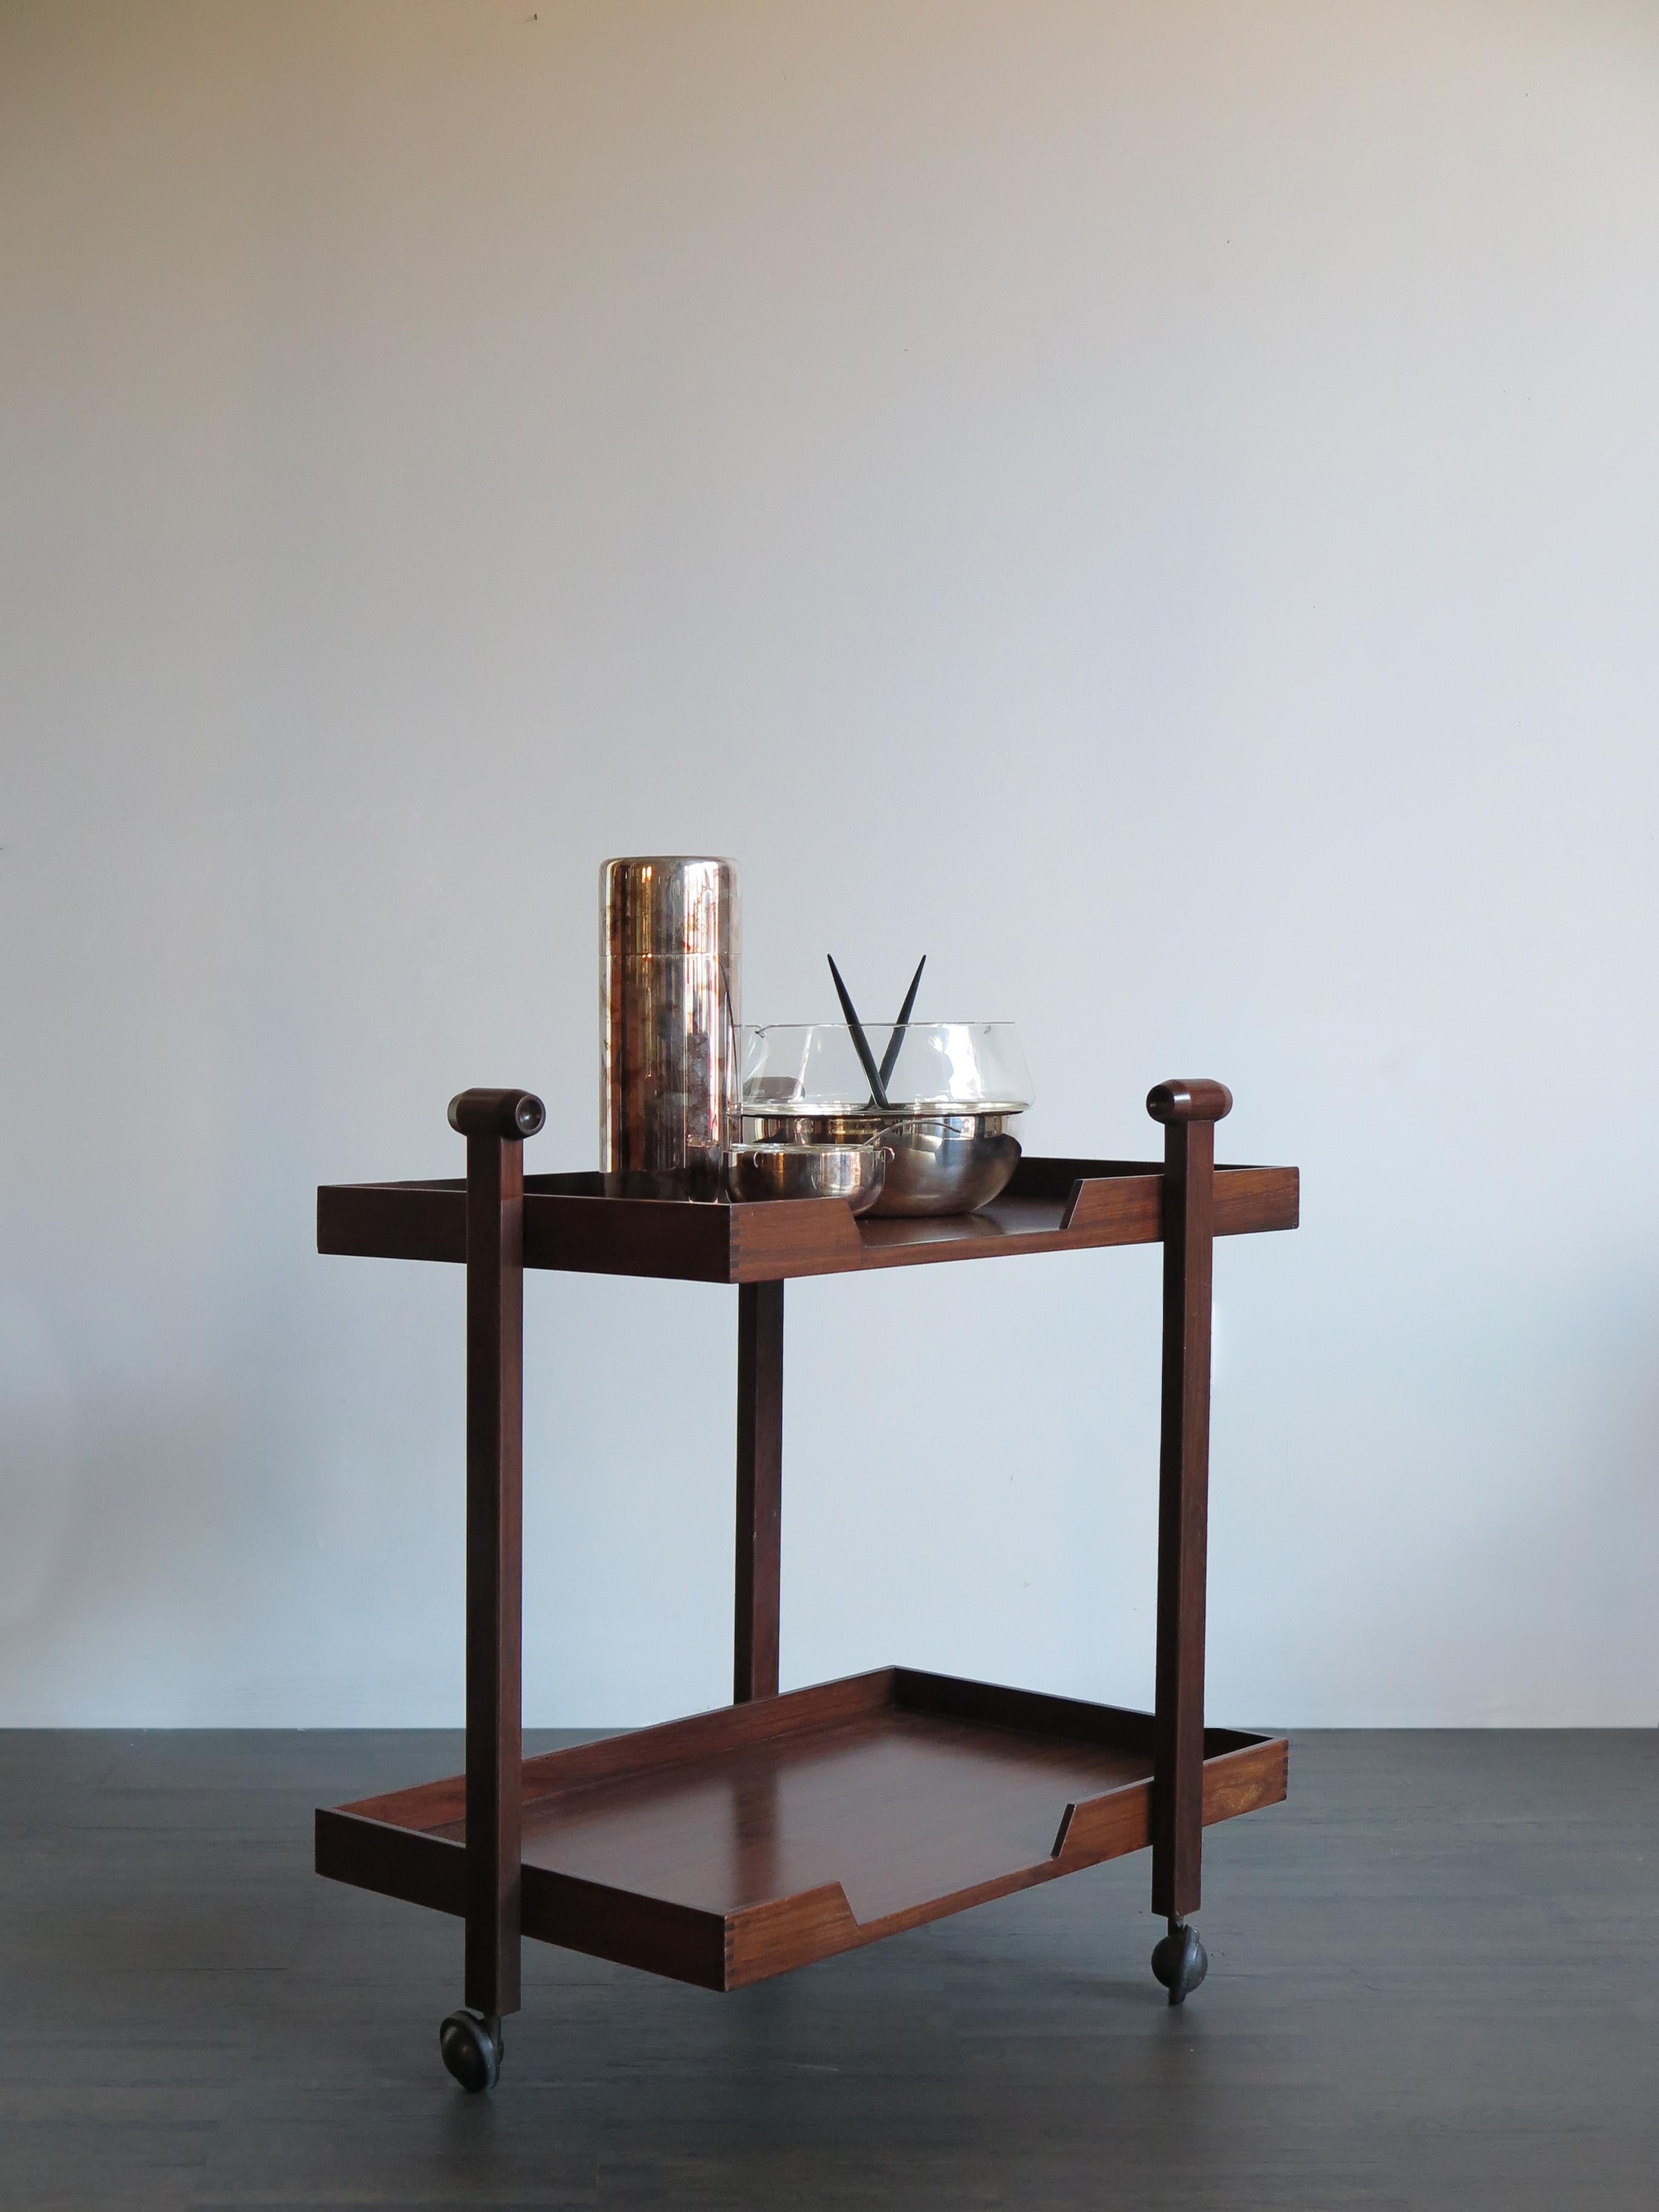 Very rare and fabulous dark wood serving trolley model CR20 designed by Franco Albini & Franca Helg and produced by Poggi from 1958.

Please note that the item is original of the period and thus shows normal signs of age and use.